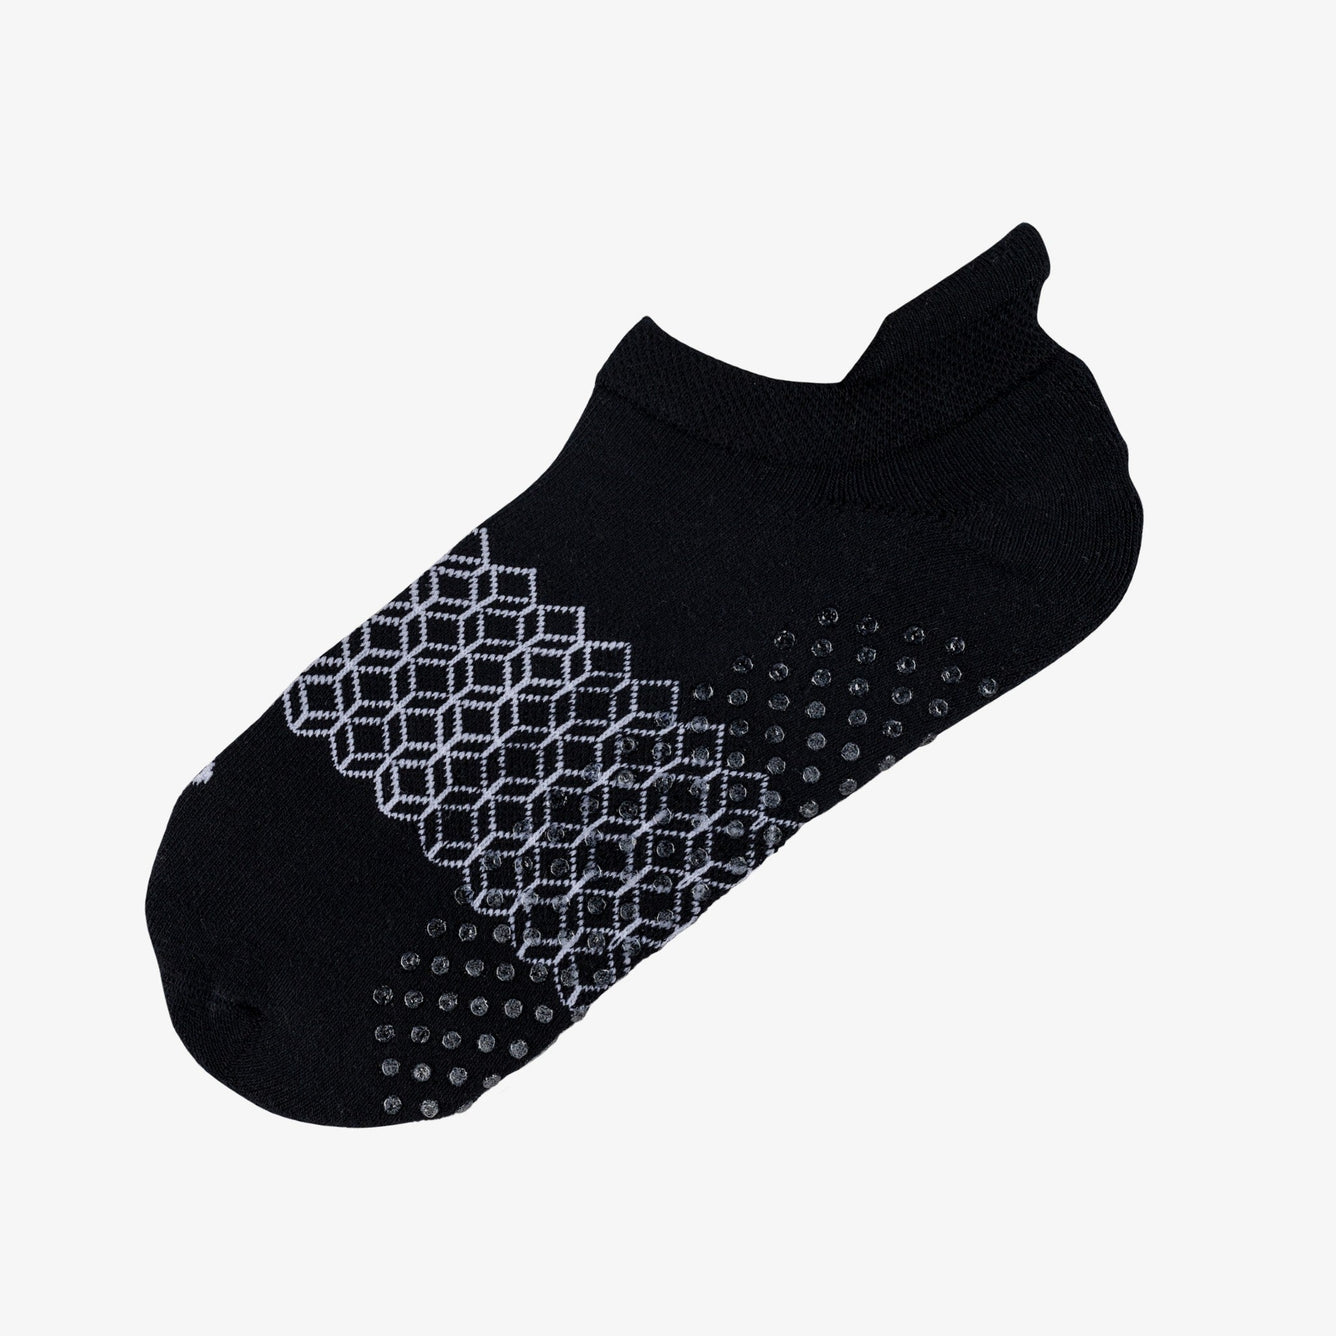 best yoga socks with silicone grippers made with organic combed cotton by hipswan uk | black